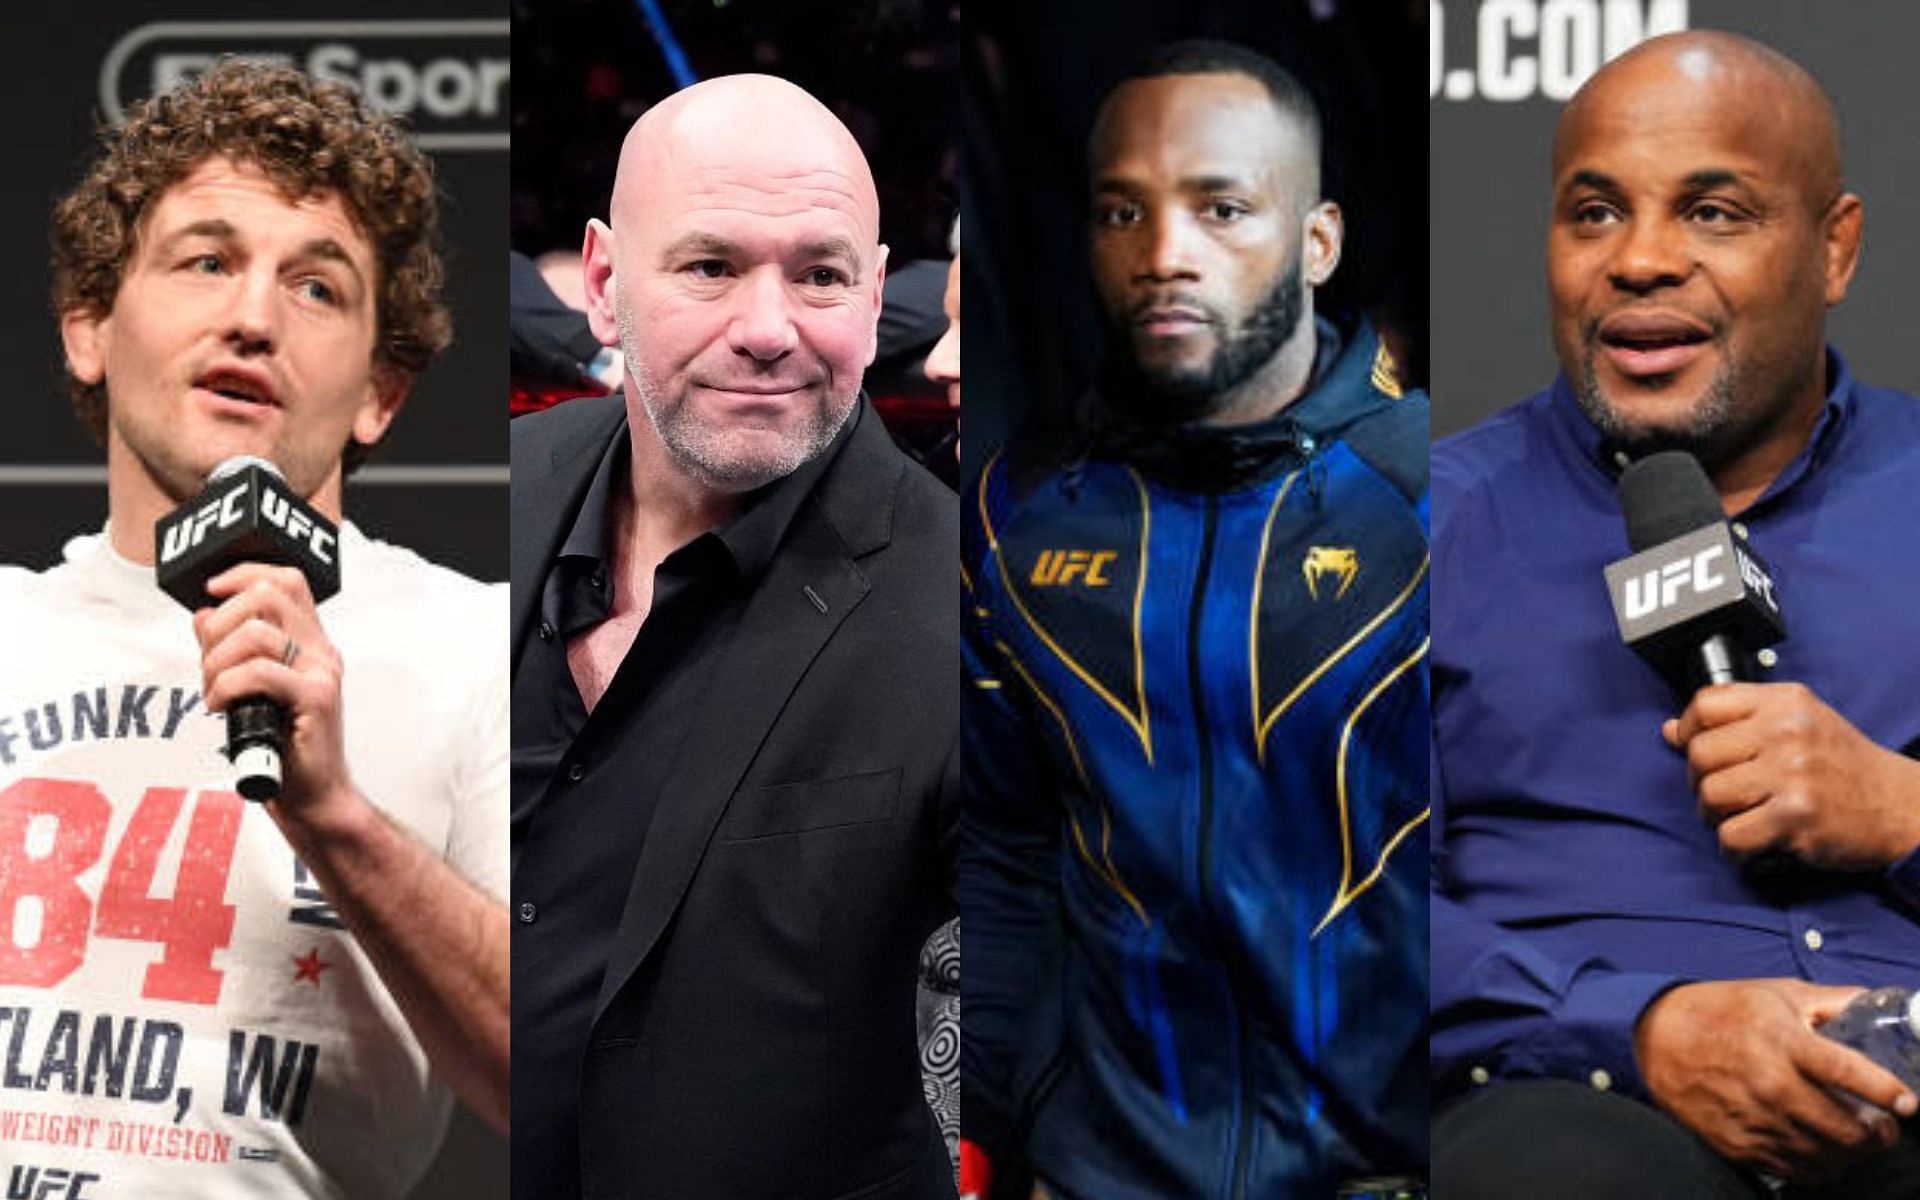 Daniel Cormier and Ben Askren weigh in on fighters not playing ball with the UFC